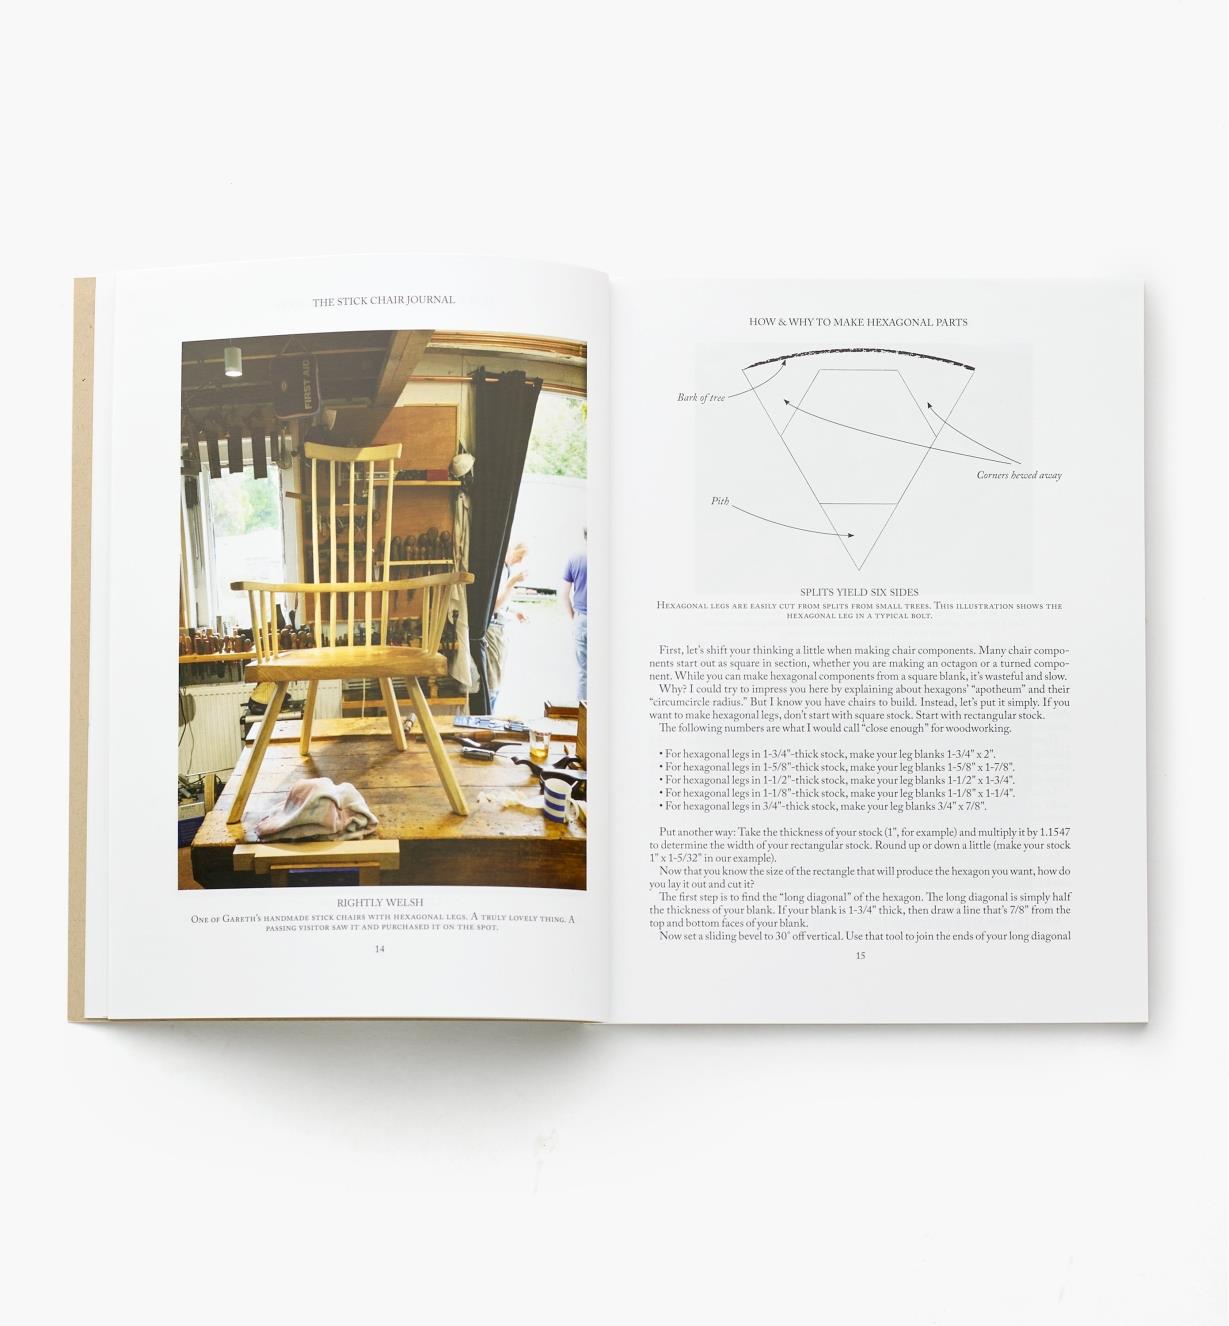 20L0390 - The Stick Chair Journal, No.1